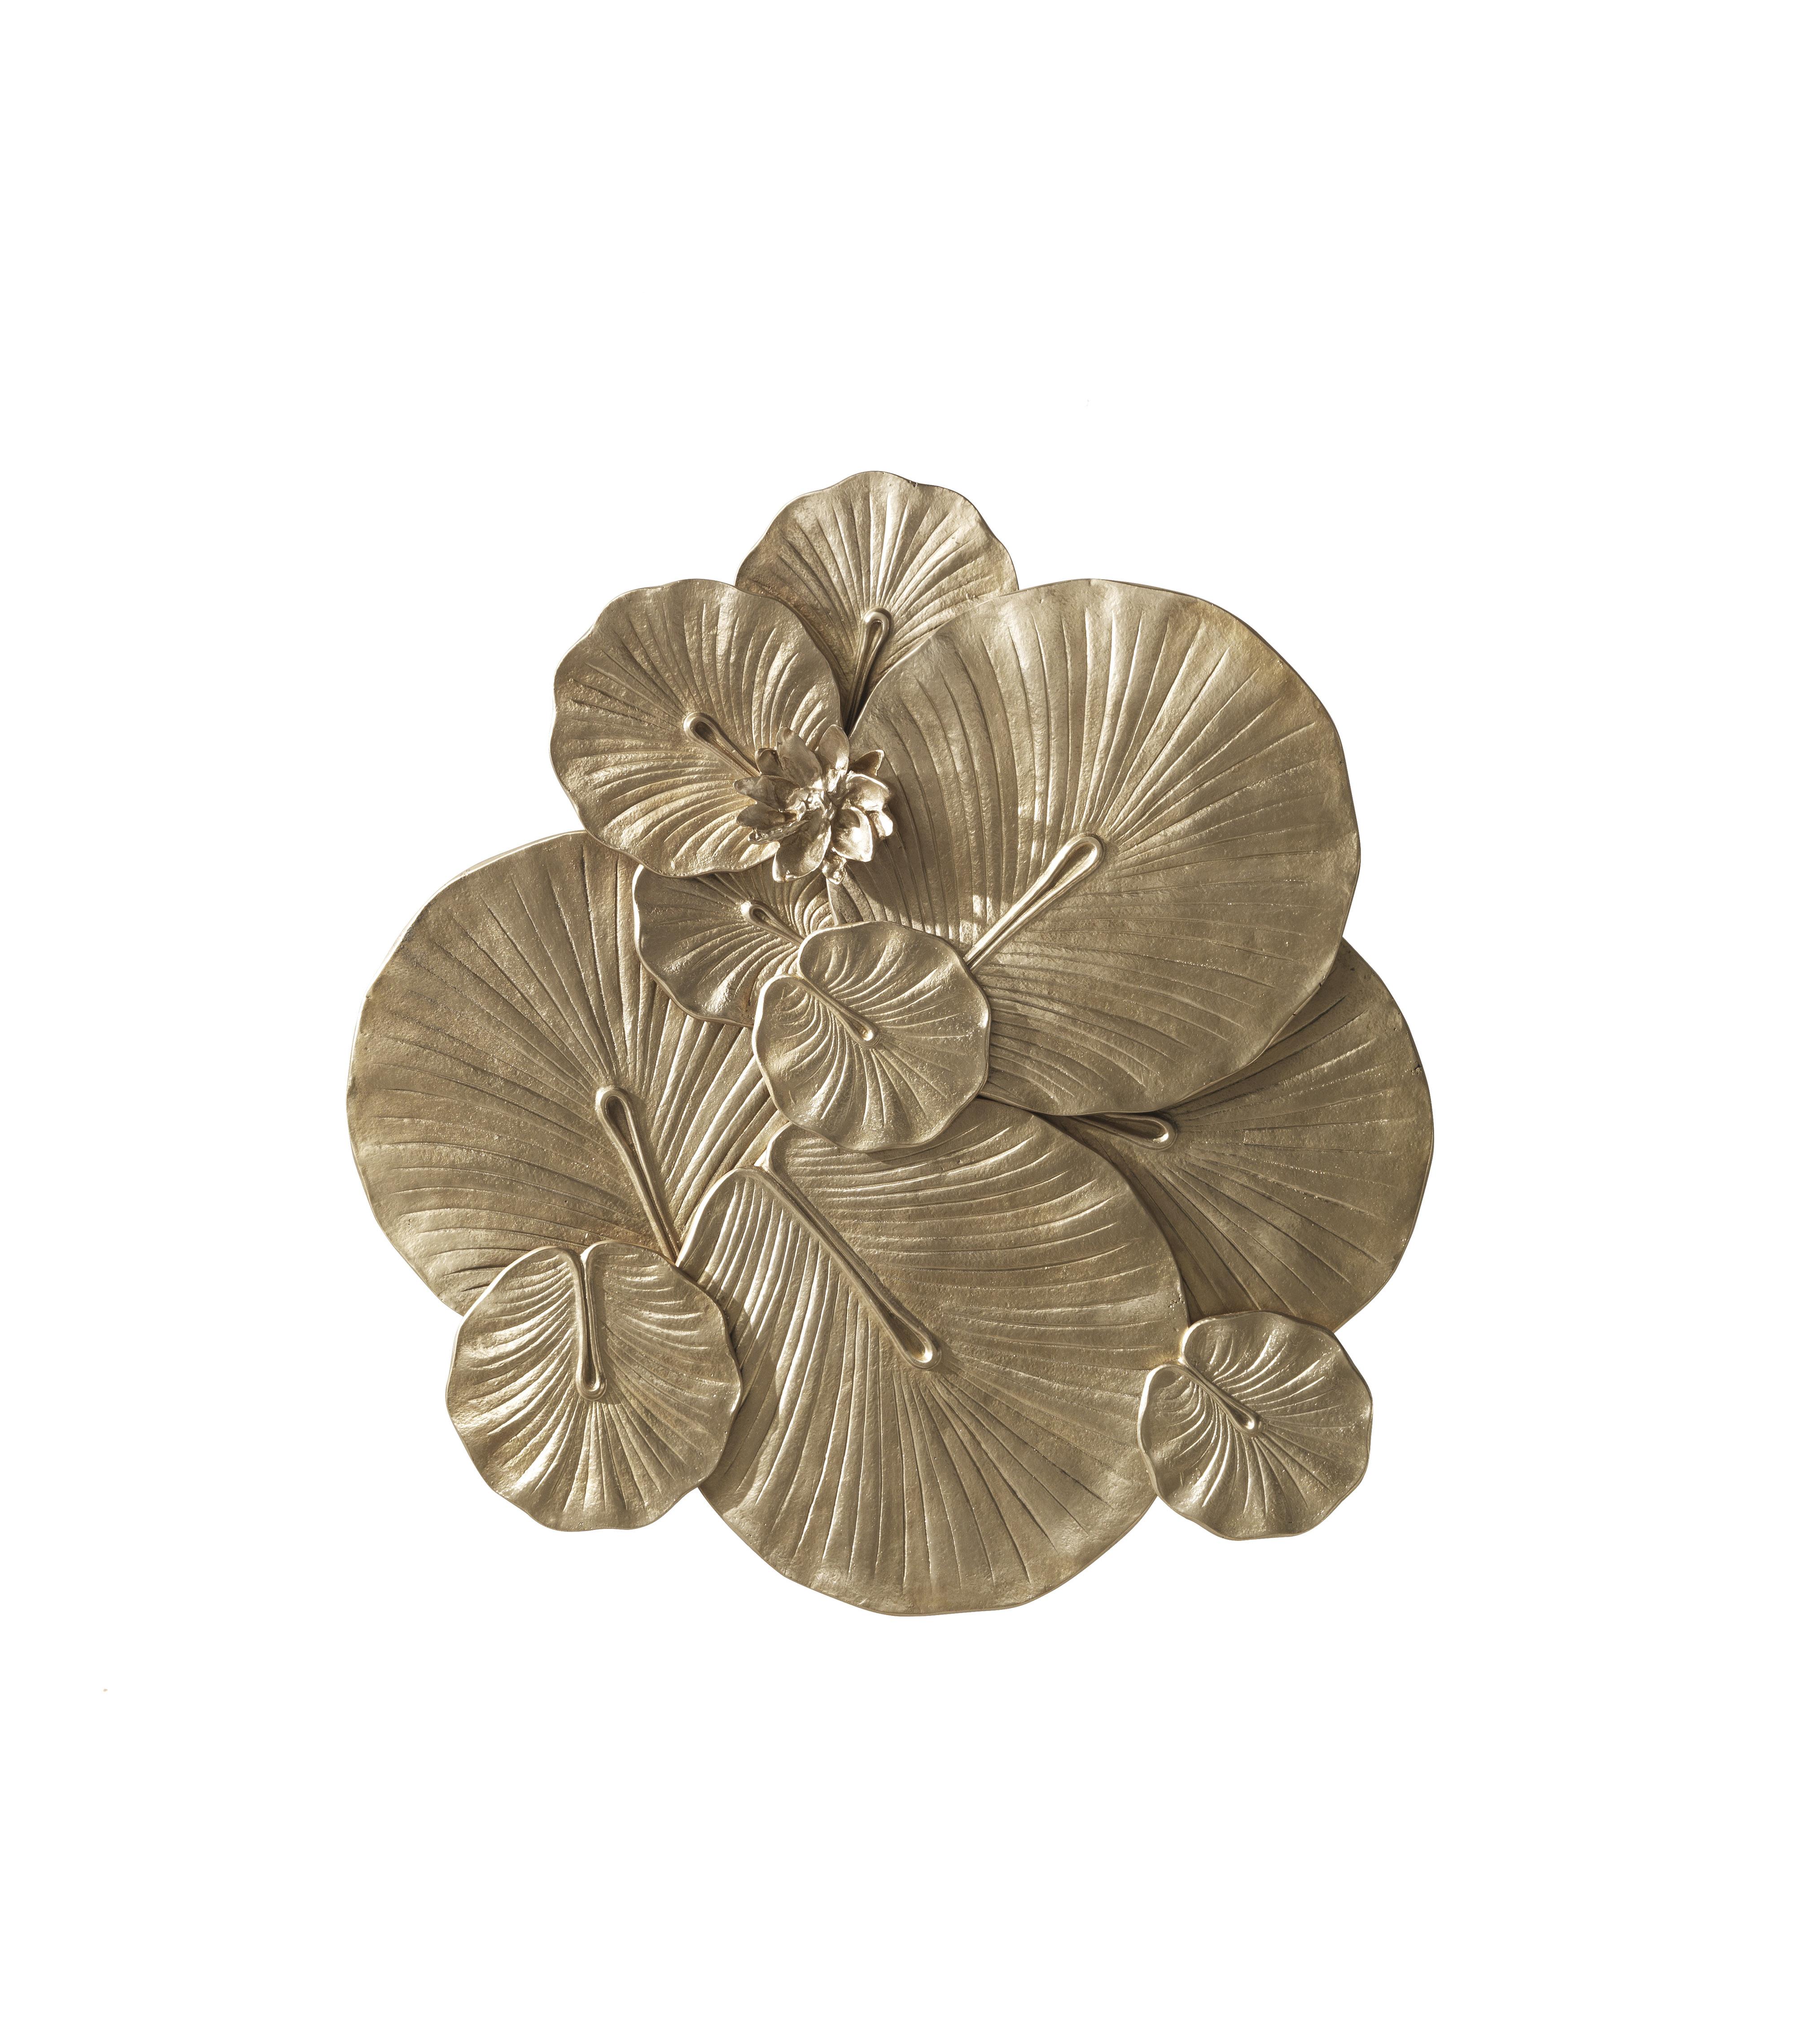 The beauty of nature is transformed into a sophisticated decorative element in Monet table: a scenographic piece of furniture where the lotus leaf motif in hand-chiseled brass casting is the element of wonder, a connection with one of the most